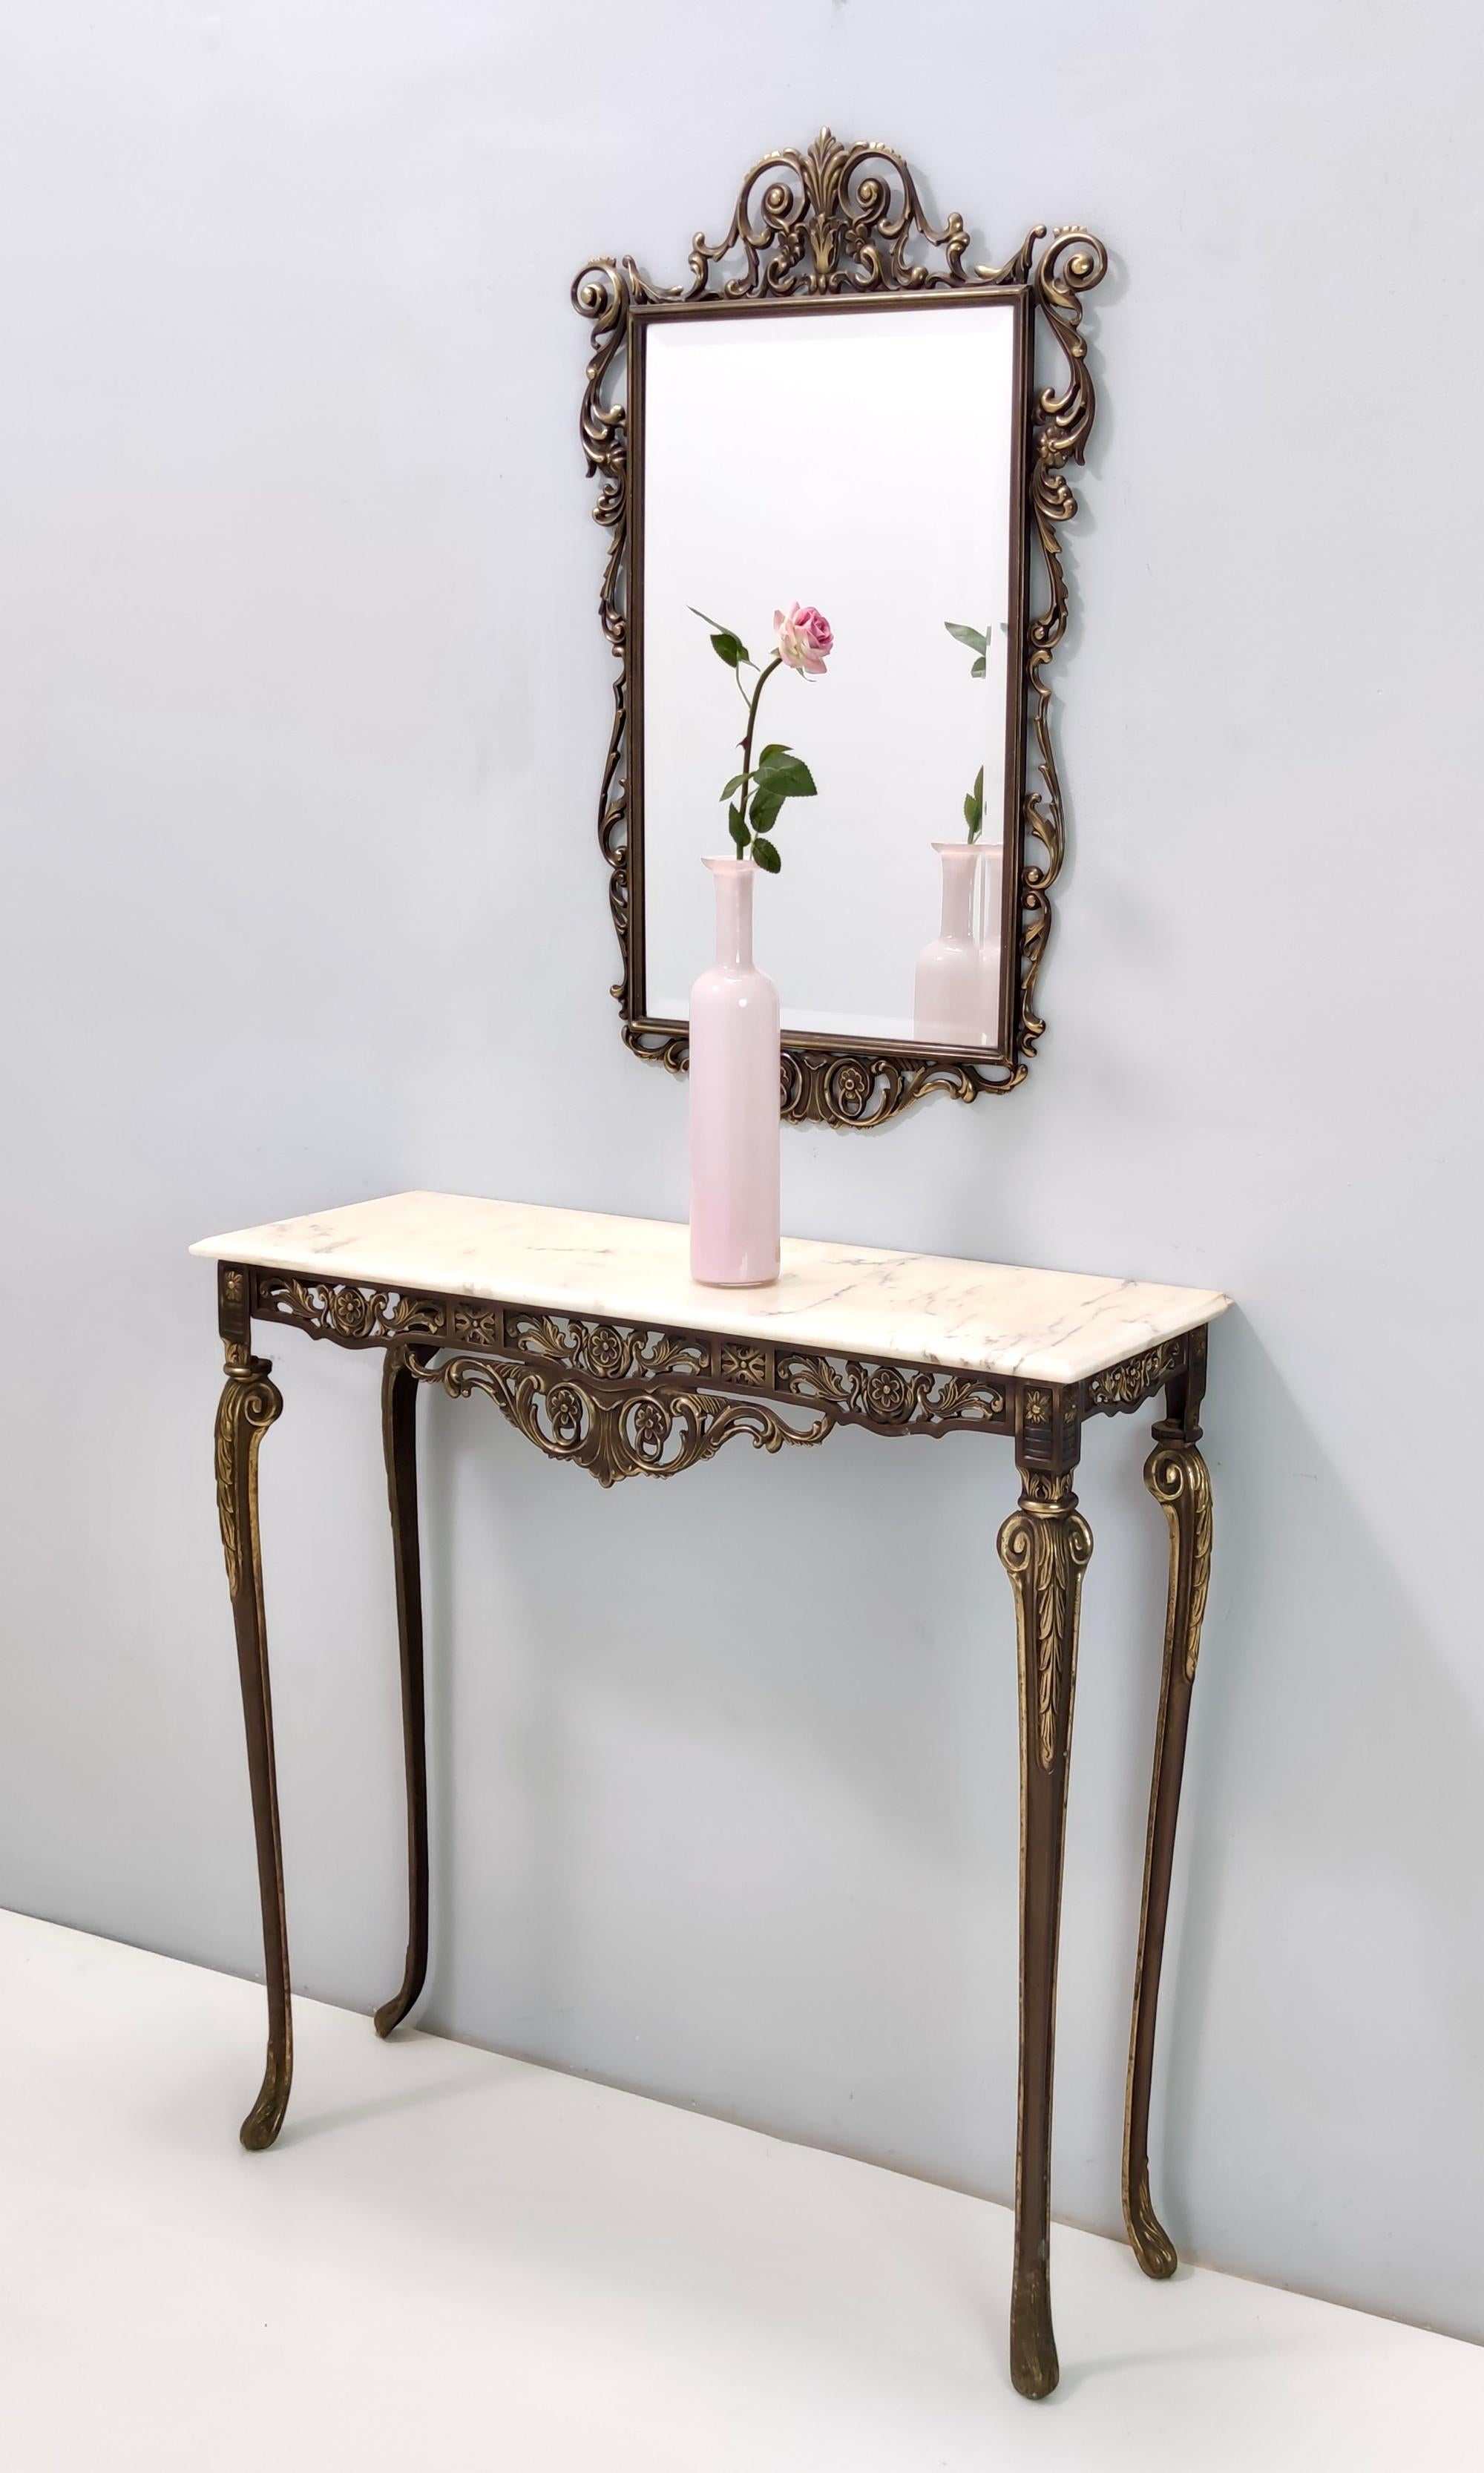 Made in Italy, 1960s.
The console table features a Portuguese pink marble top and both the mirror and the console have a cast brass frame.
They might show slight traces of use since they are vintage, but they can be considered as in excellent